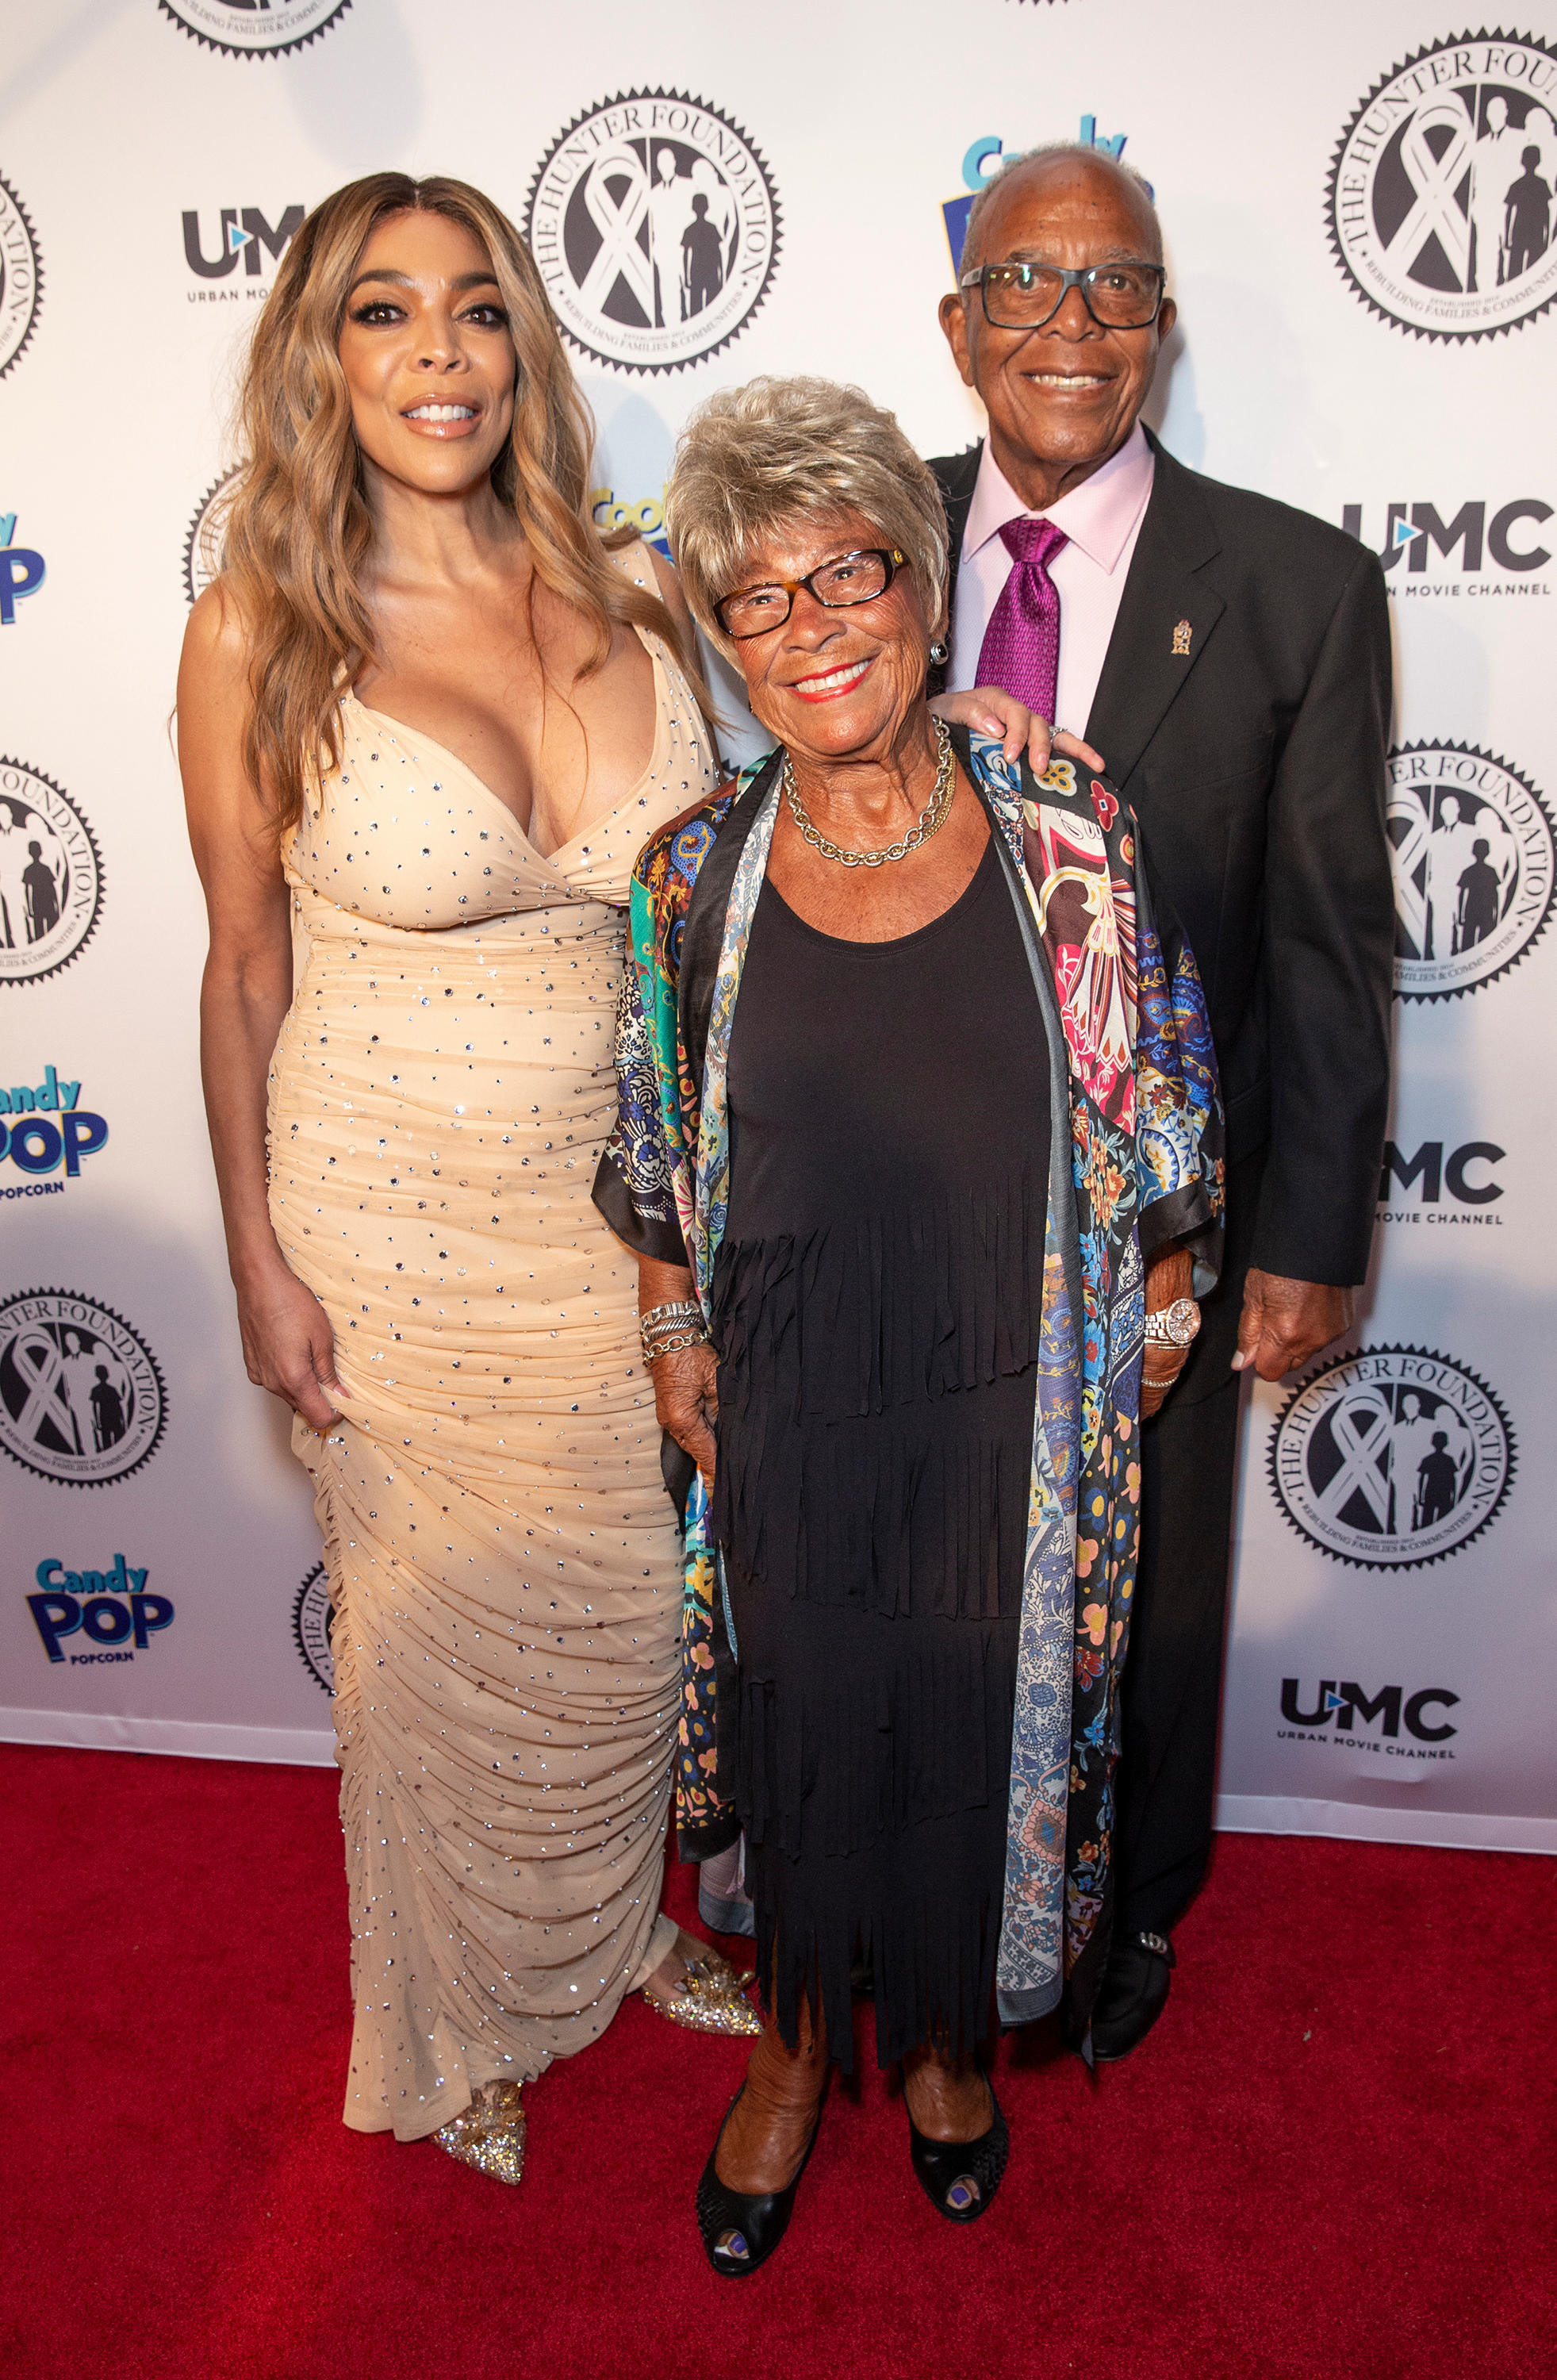 Wendy Williams and her parents Thomas and Shirley attend The Hunter Foundation gala at Hammerstein Ballroom